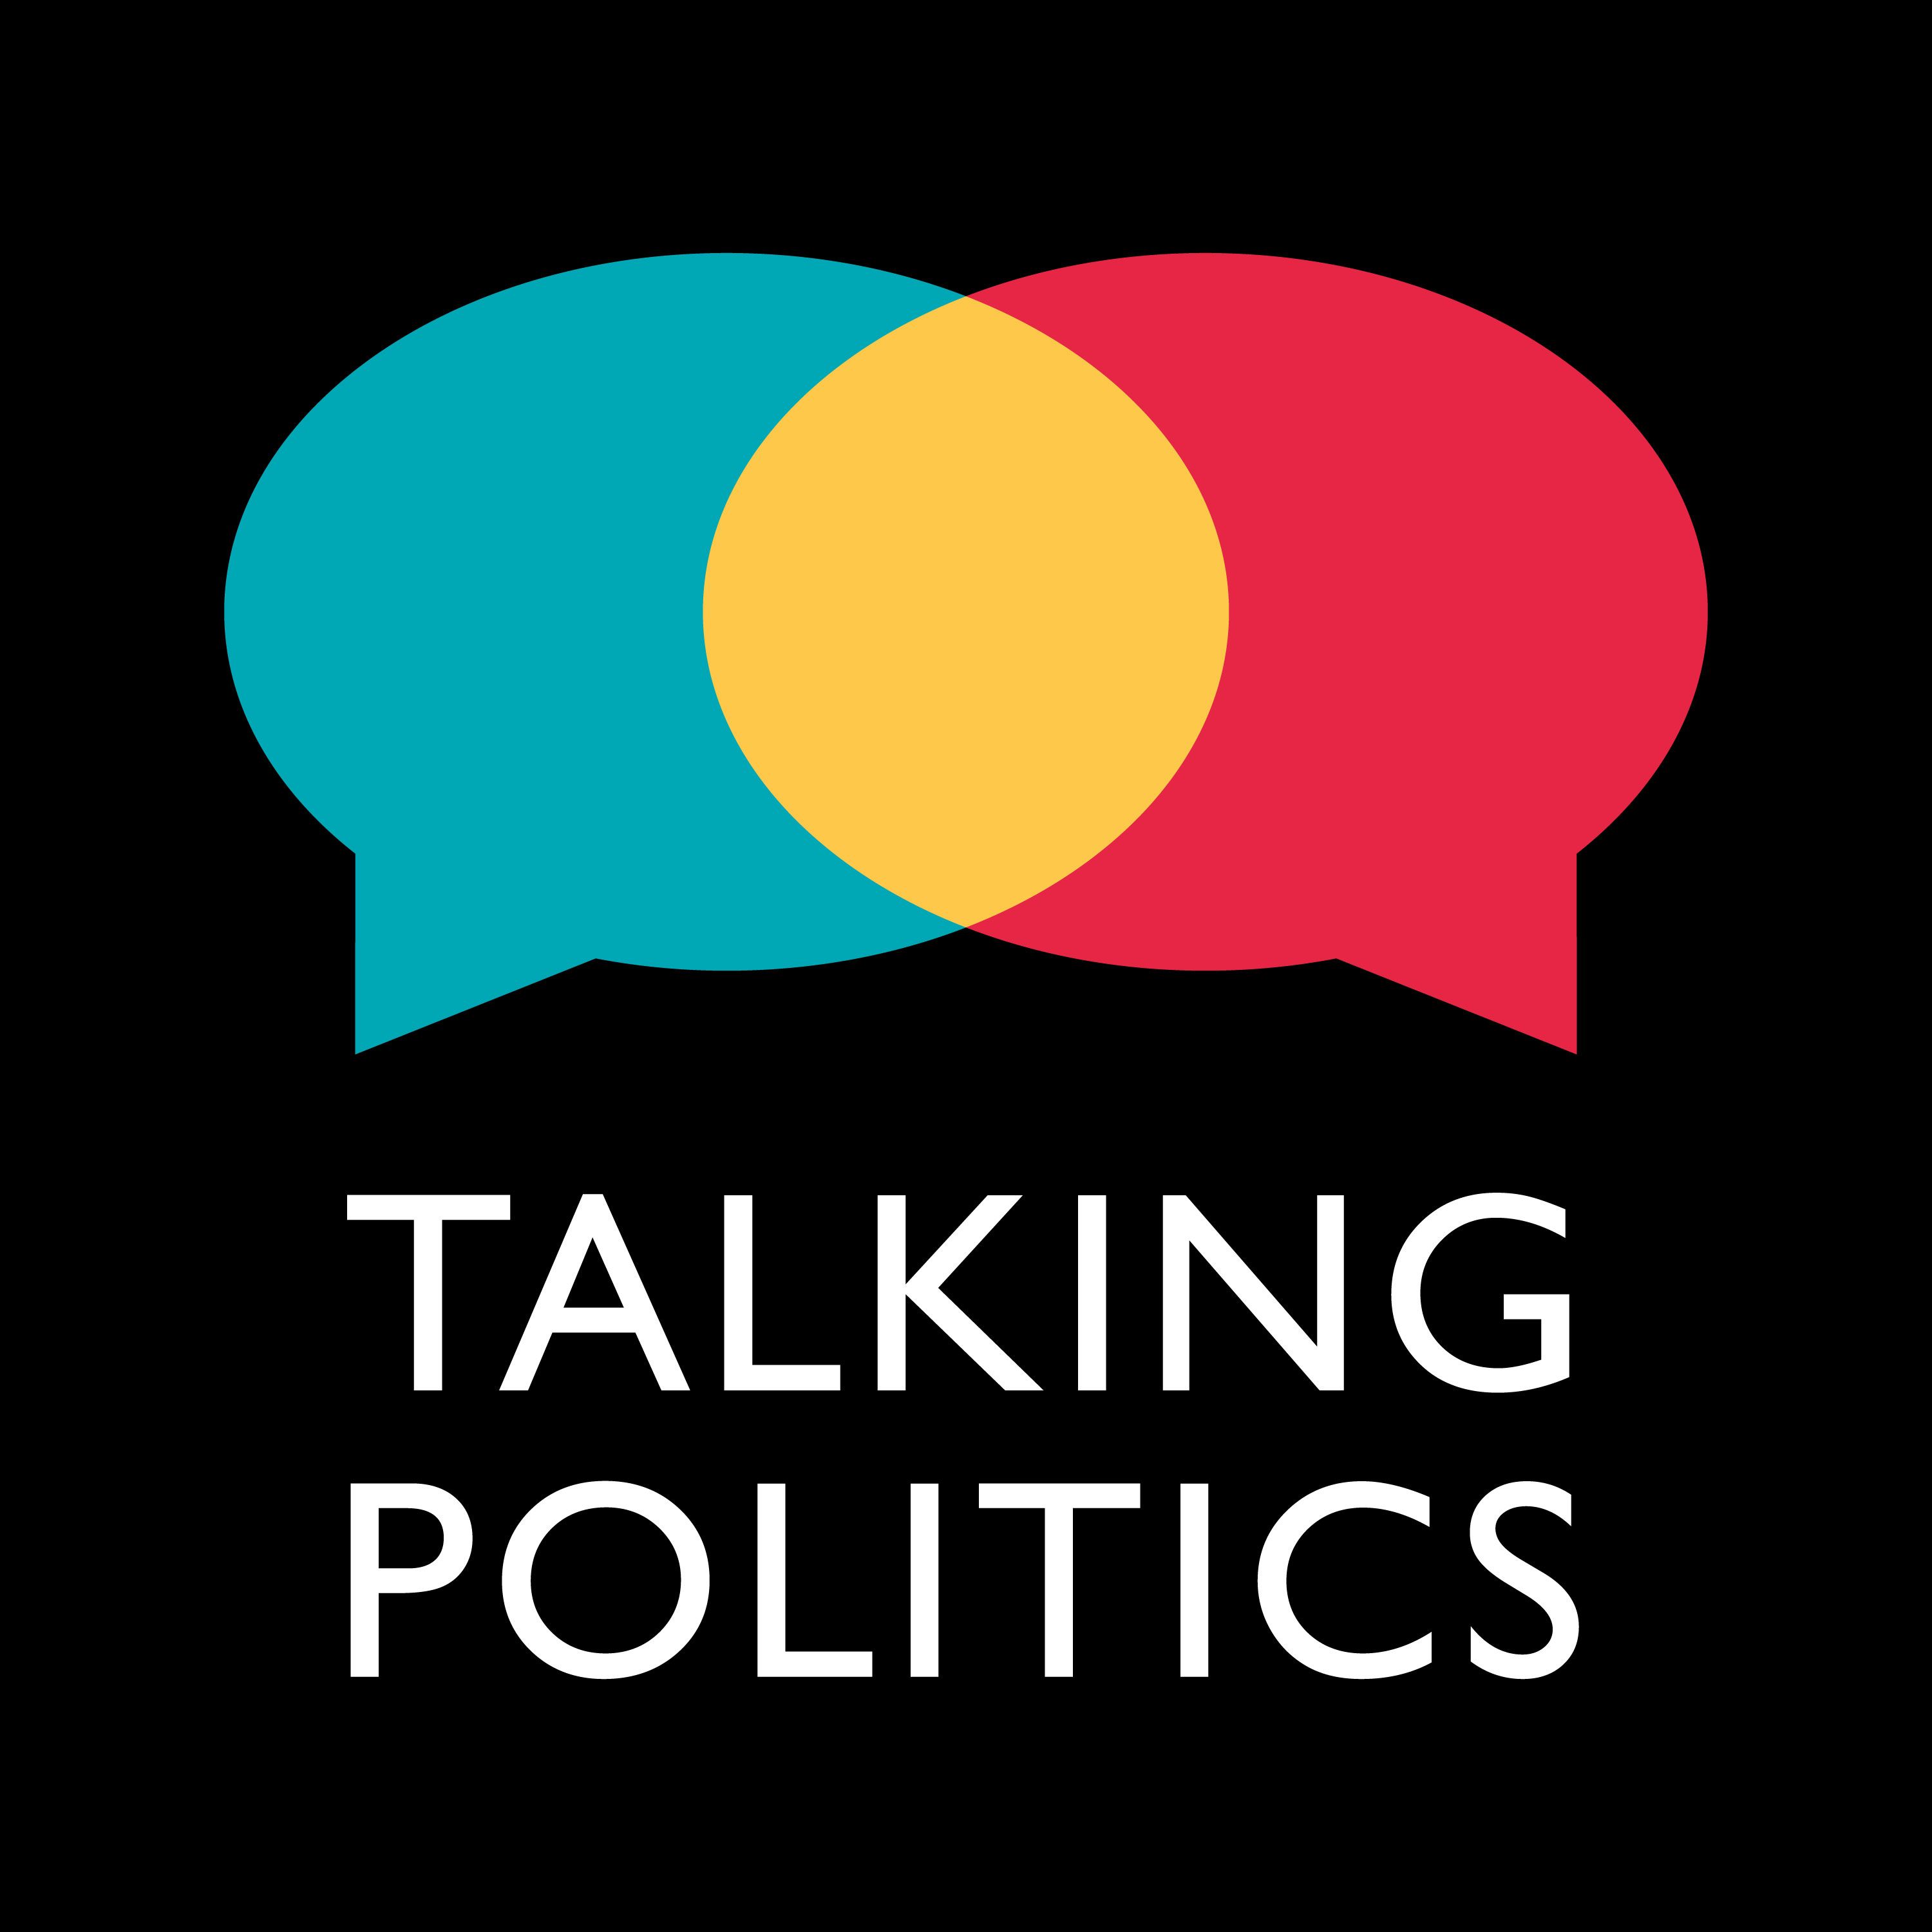 Q & A With Helen and David: UK Politics and the Union